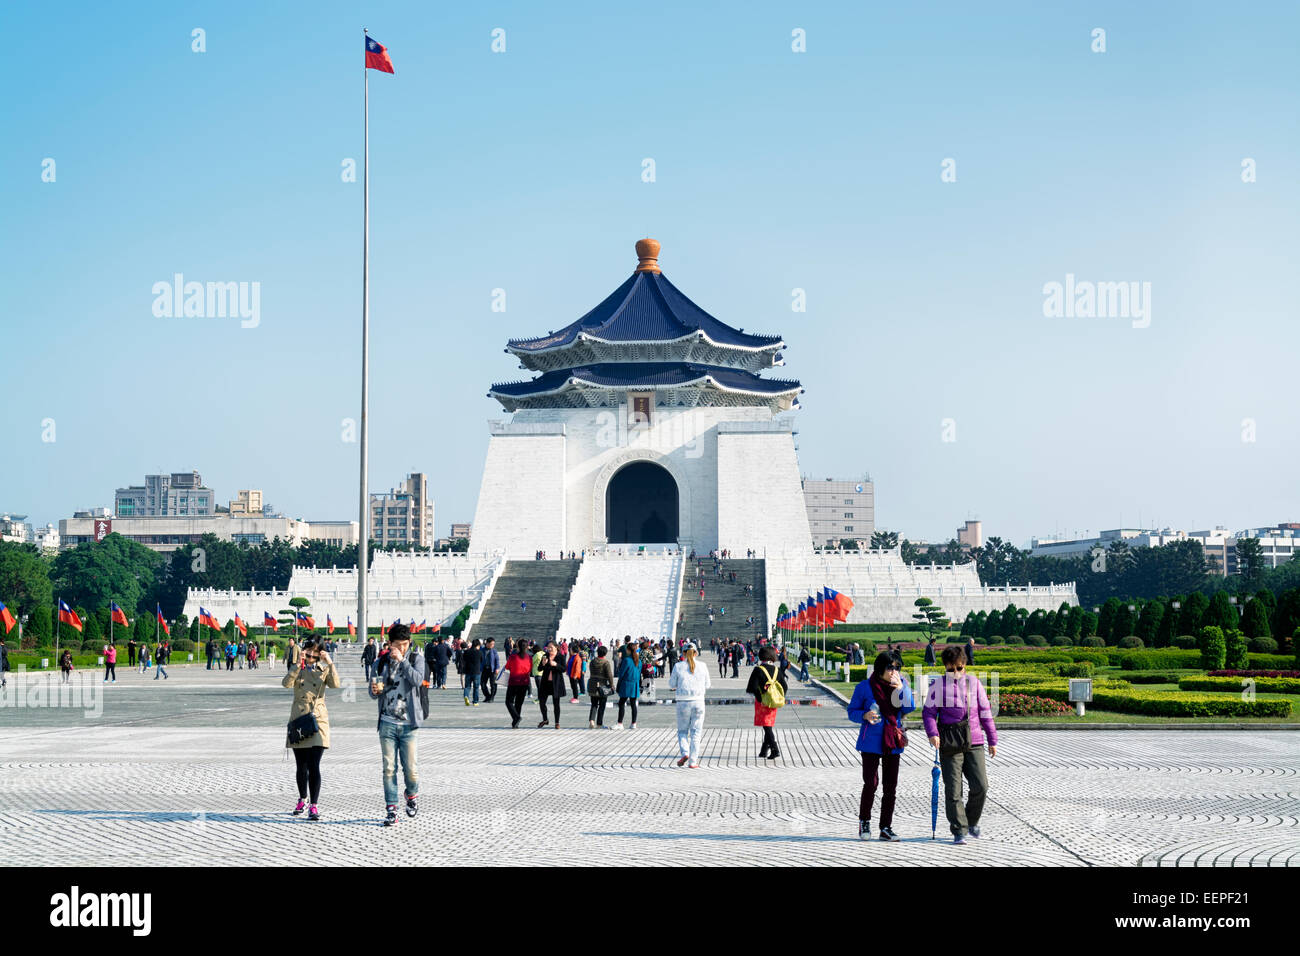 Taipei, Taiwan - Dec 29, 2014:Tourists at the Chiang Kai-Shek Memorial Hall in Taipei. Chiang Kai-shek Memorial Hall is a popula Stock Photo